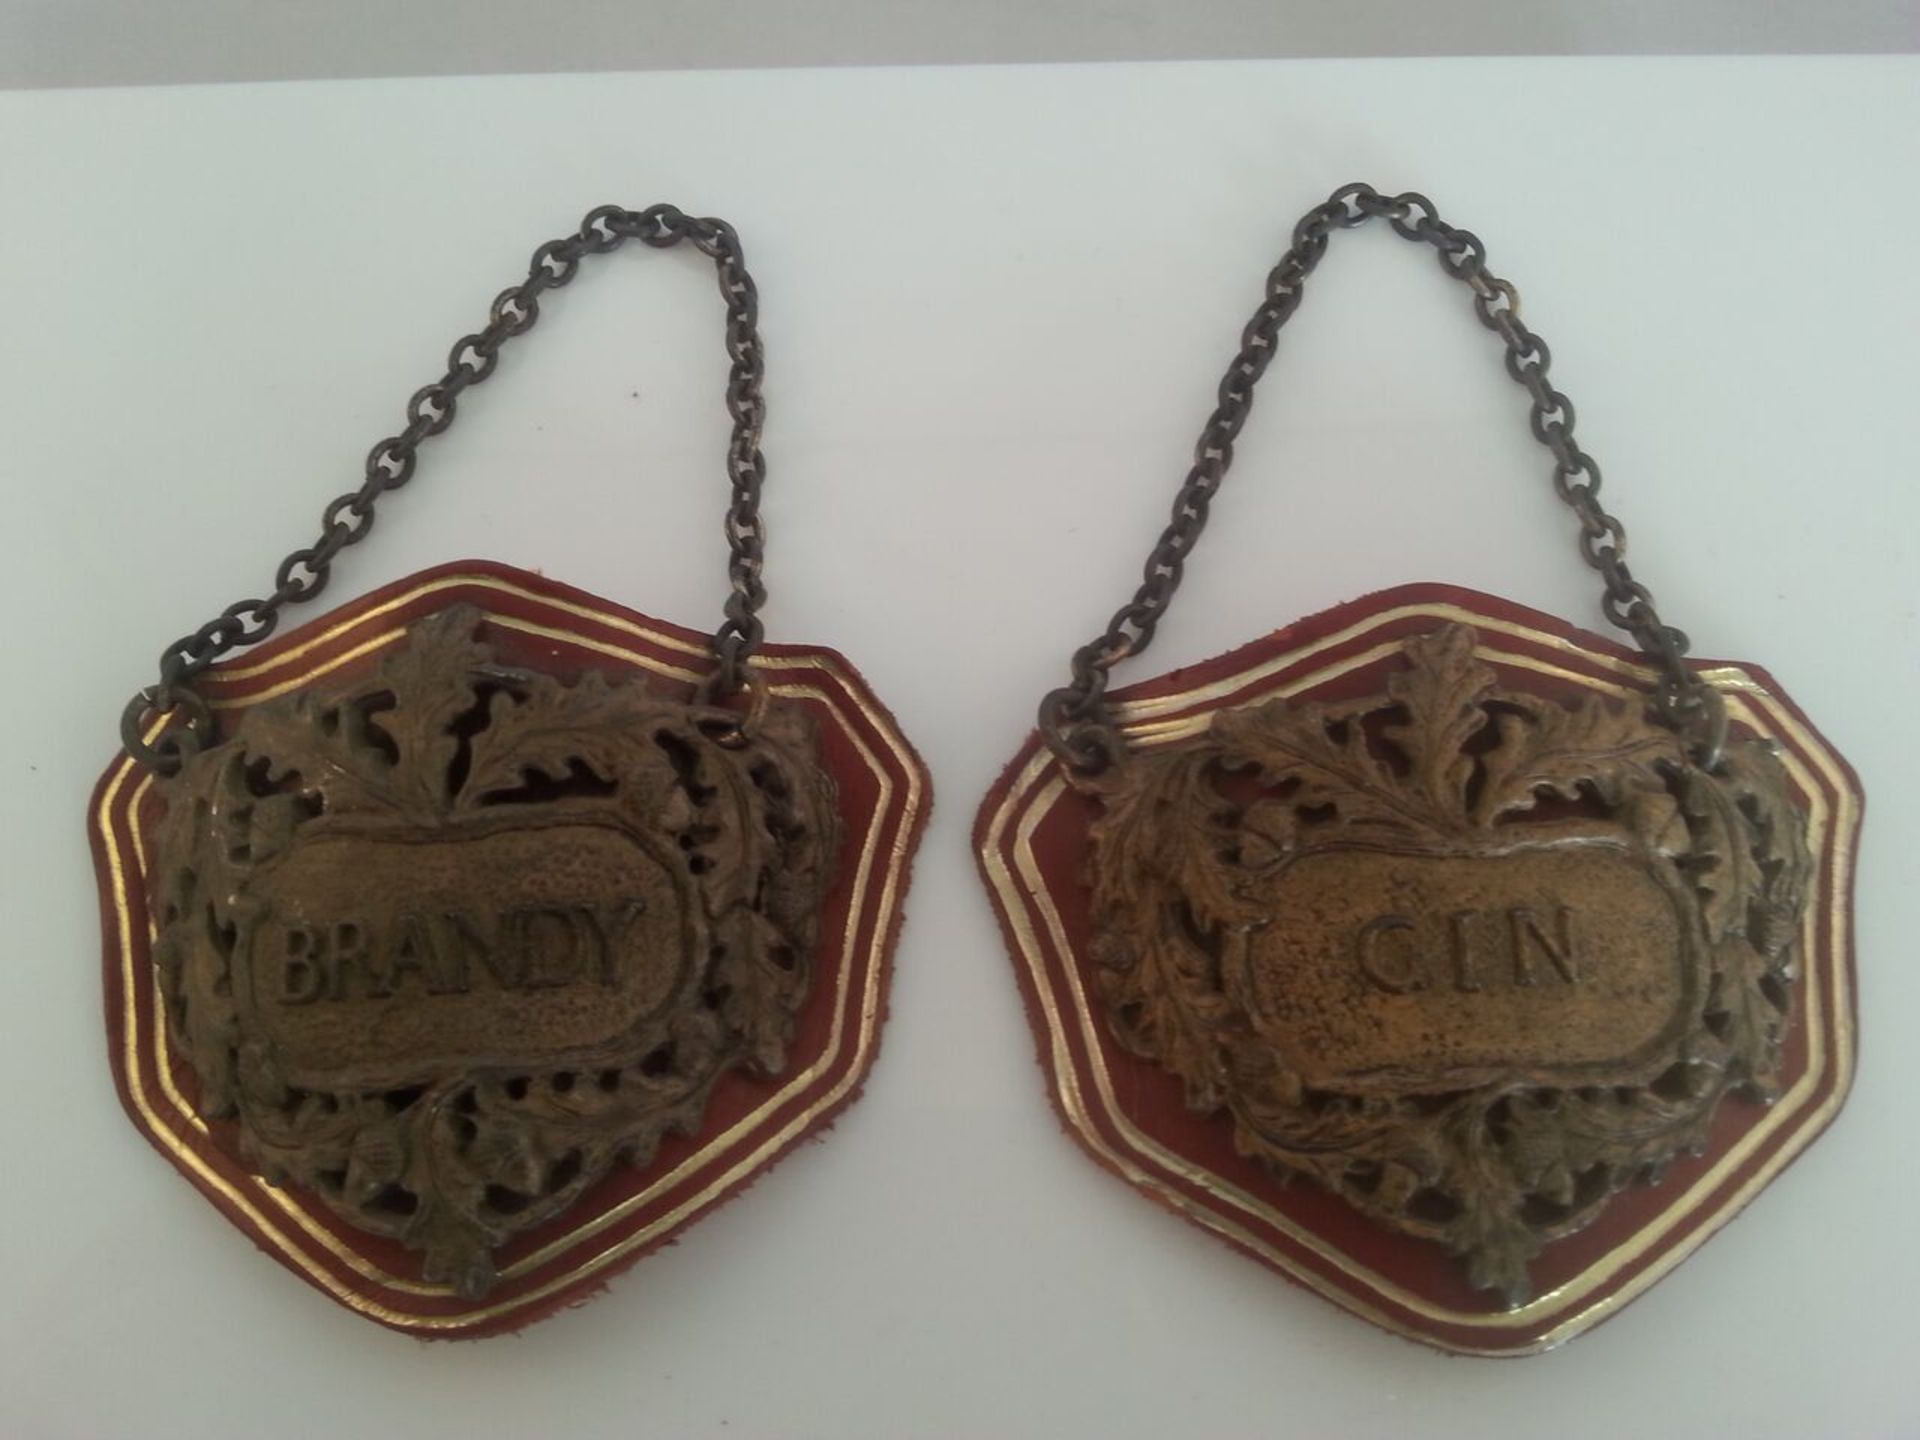 Good pair of metal on leather spirit decanter labels - GIN & BRANDY with oak leaves and acorns to